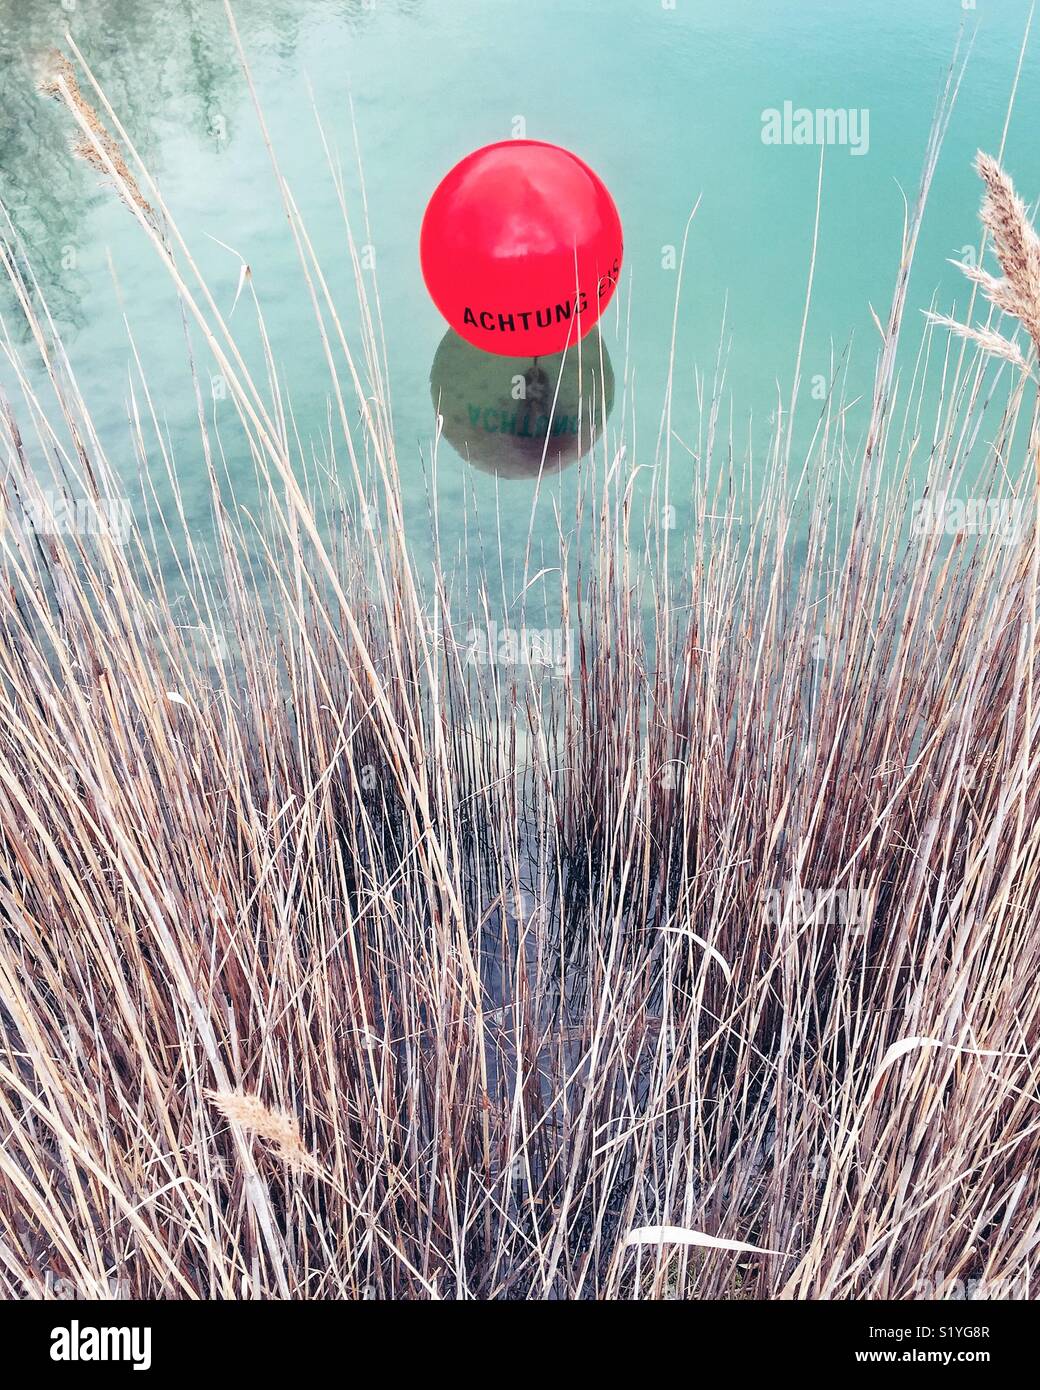 A red balloon with the message 'Achtung' floating on the surface of a pond, with reeds and weeds Stock Photo